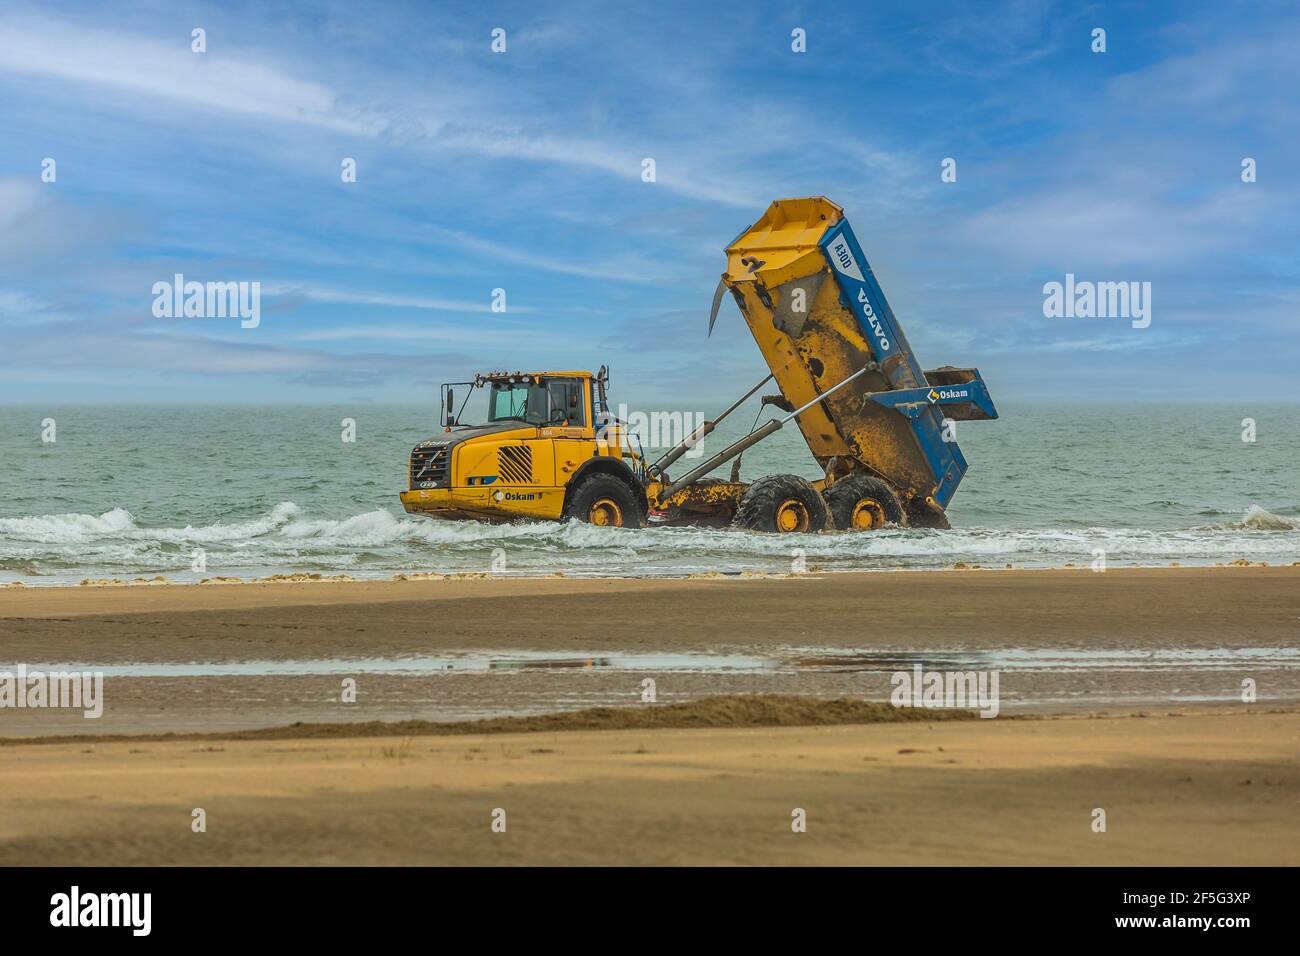 IJmuiderslag, IJmuiden, province of North Holland, The Netherlands, March 25, 2021: Volvo Dumper Volvo A30D dumps sand in surf of North sea Stock Photo